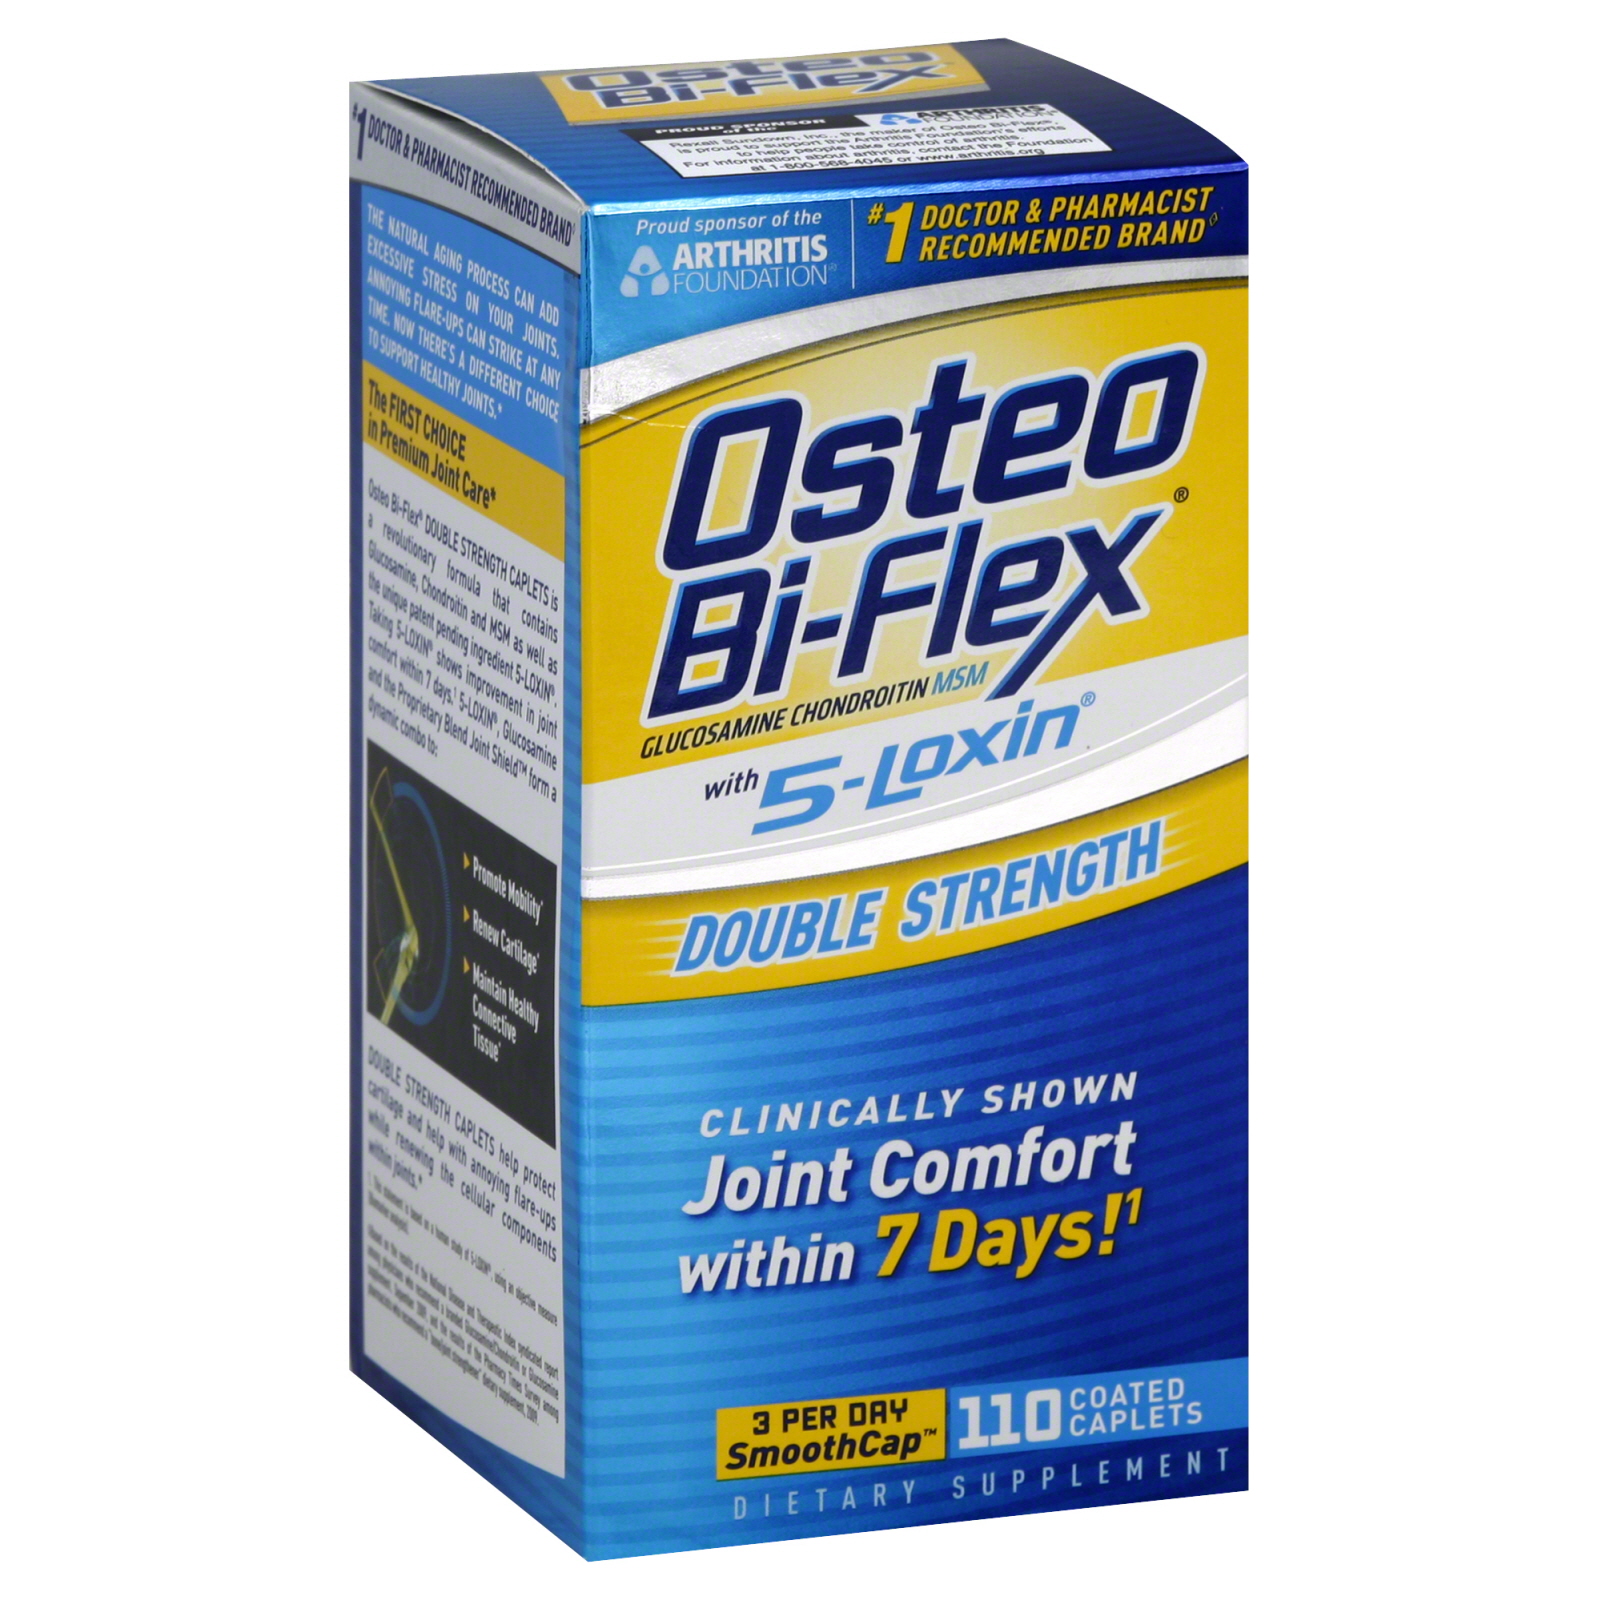 Osteo Bi-Flex Glucosamine Chondroitin MSM, with 5-Loxin, Double Strength, Coated Caplets, 100 caplets